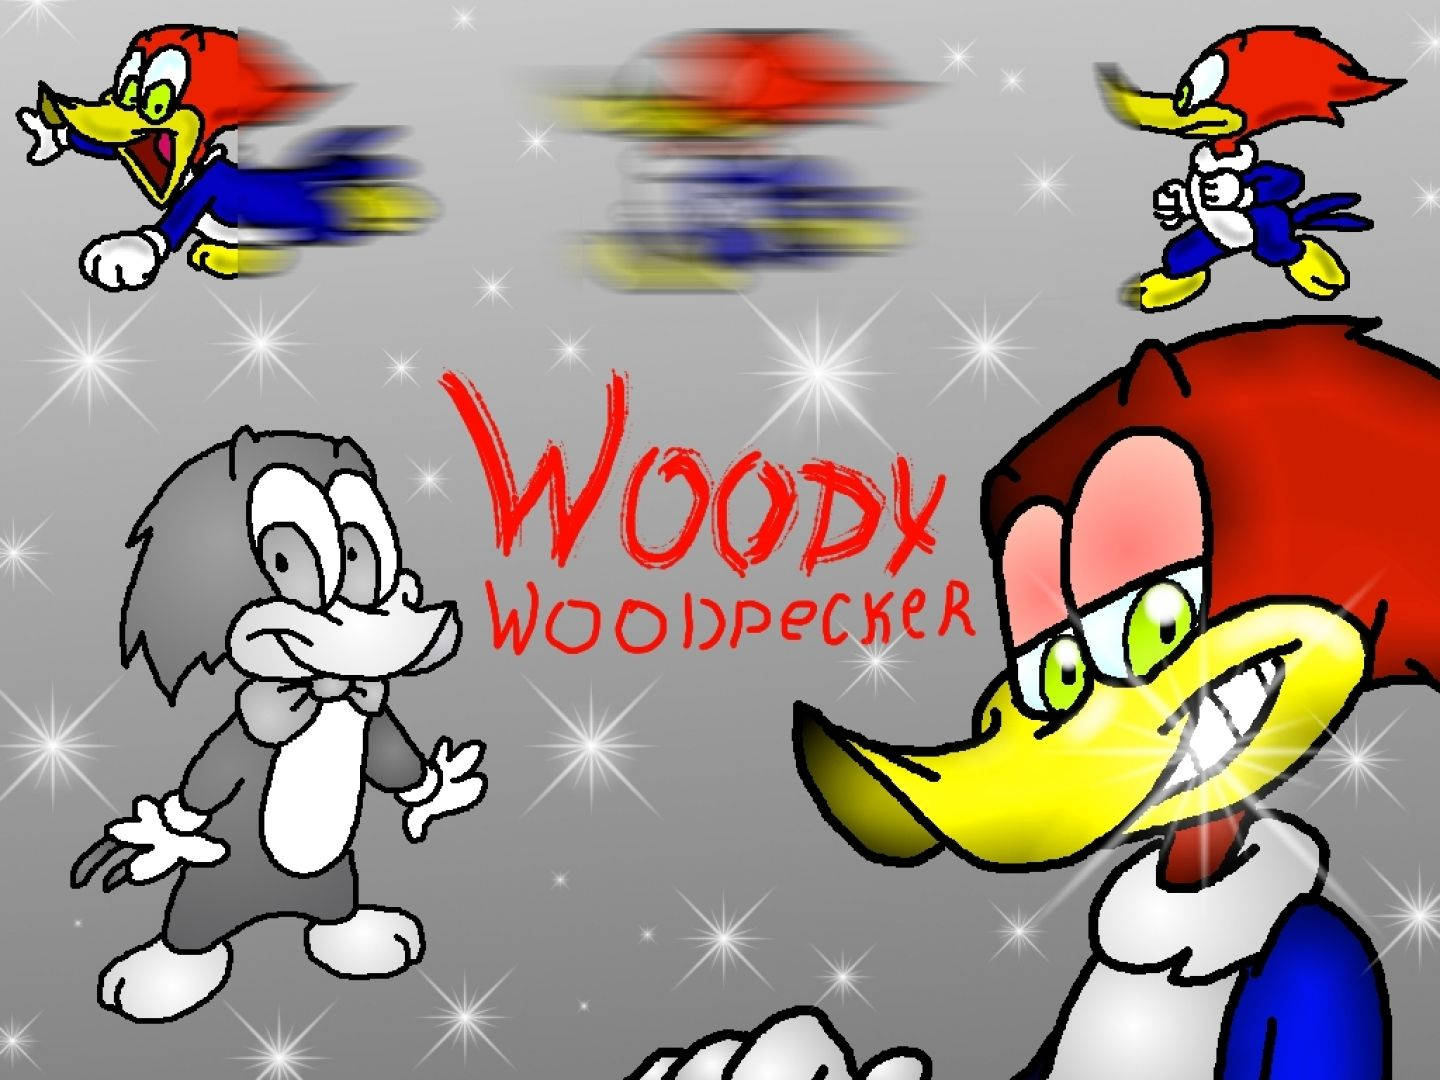 Woody Woodpecker, the lovable animated bird Wallpaper